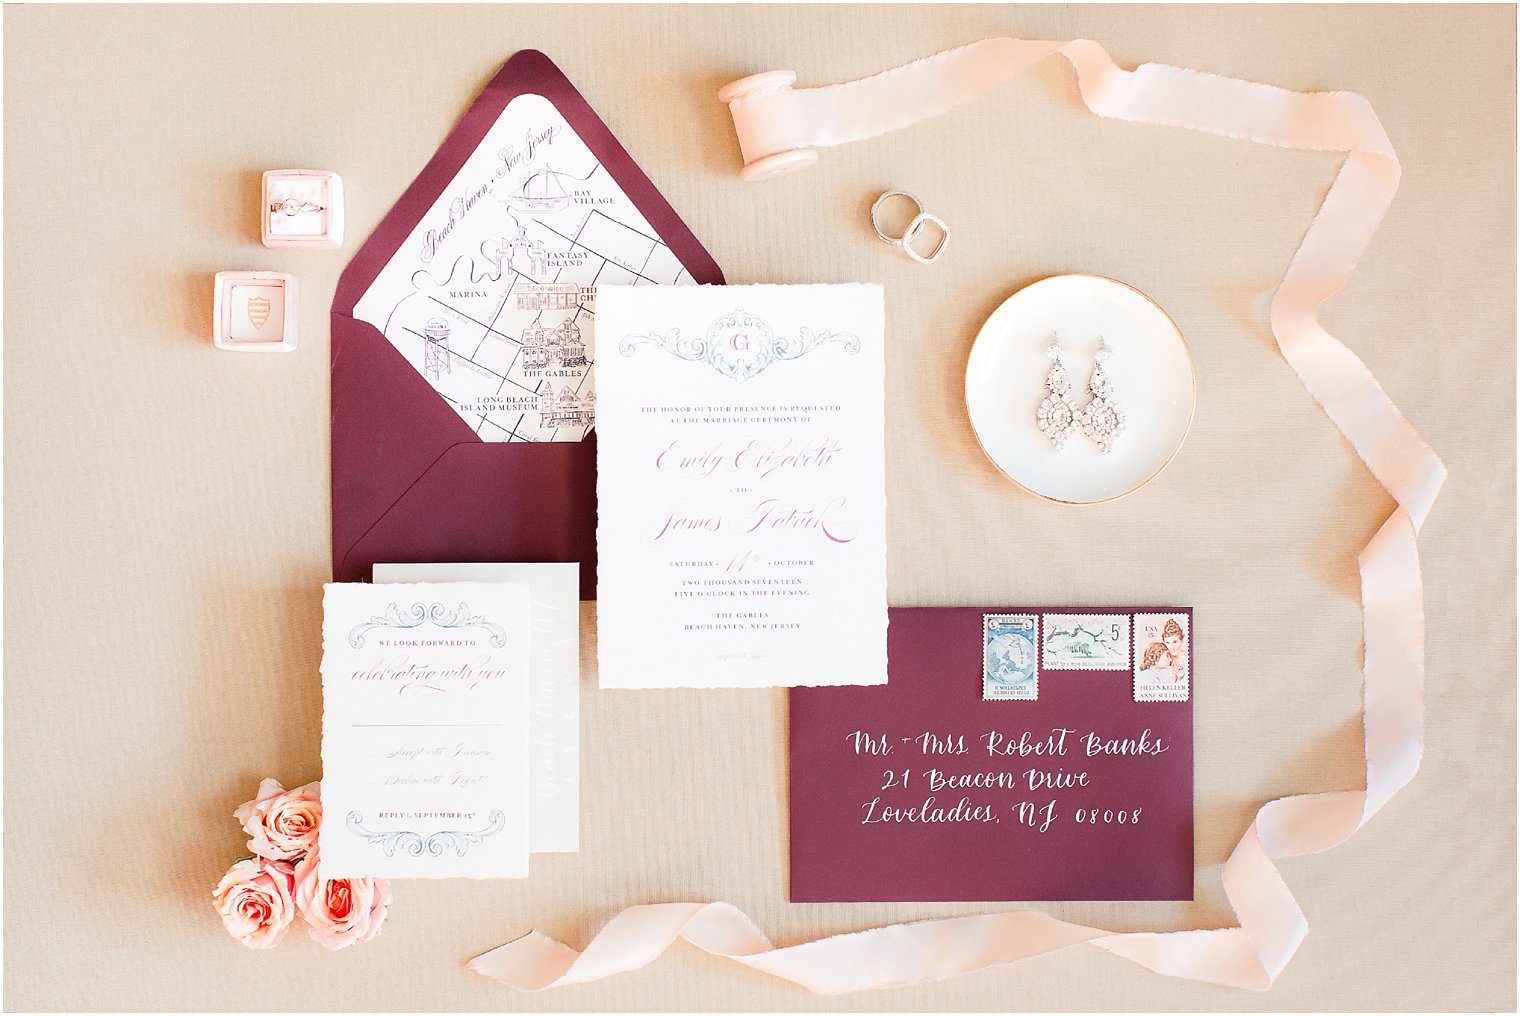 Invitation suite by Britt Larson | The Gables Styled Shoot 